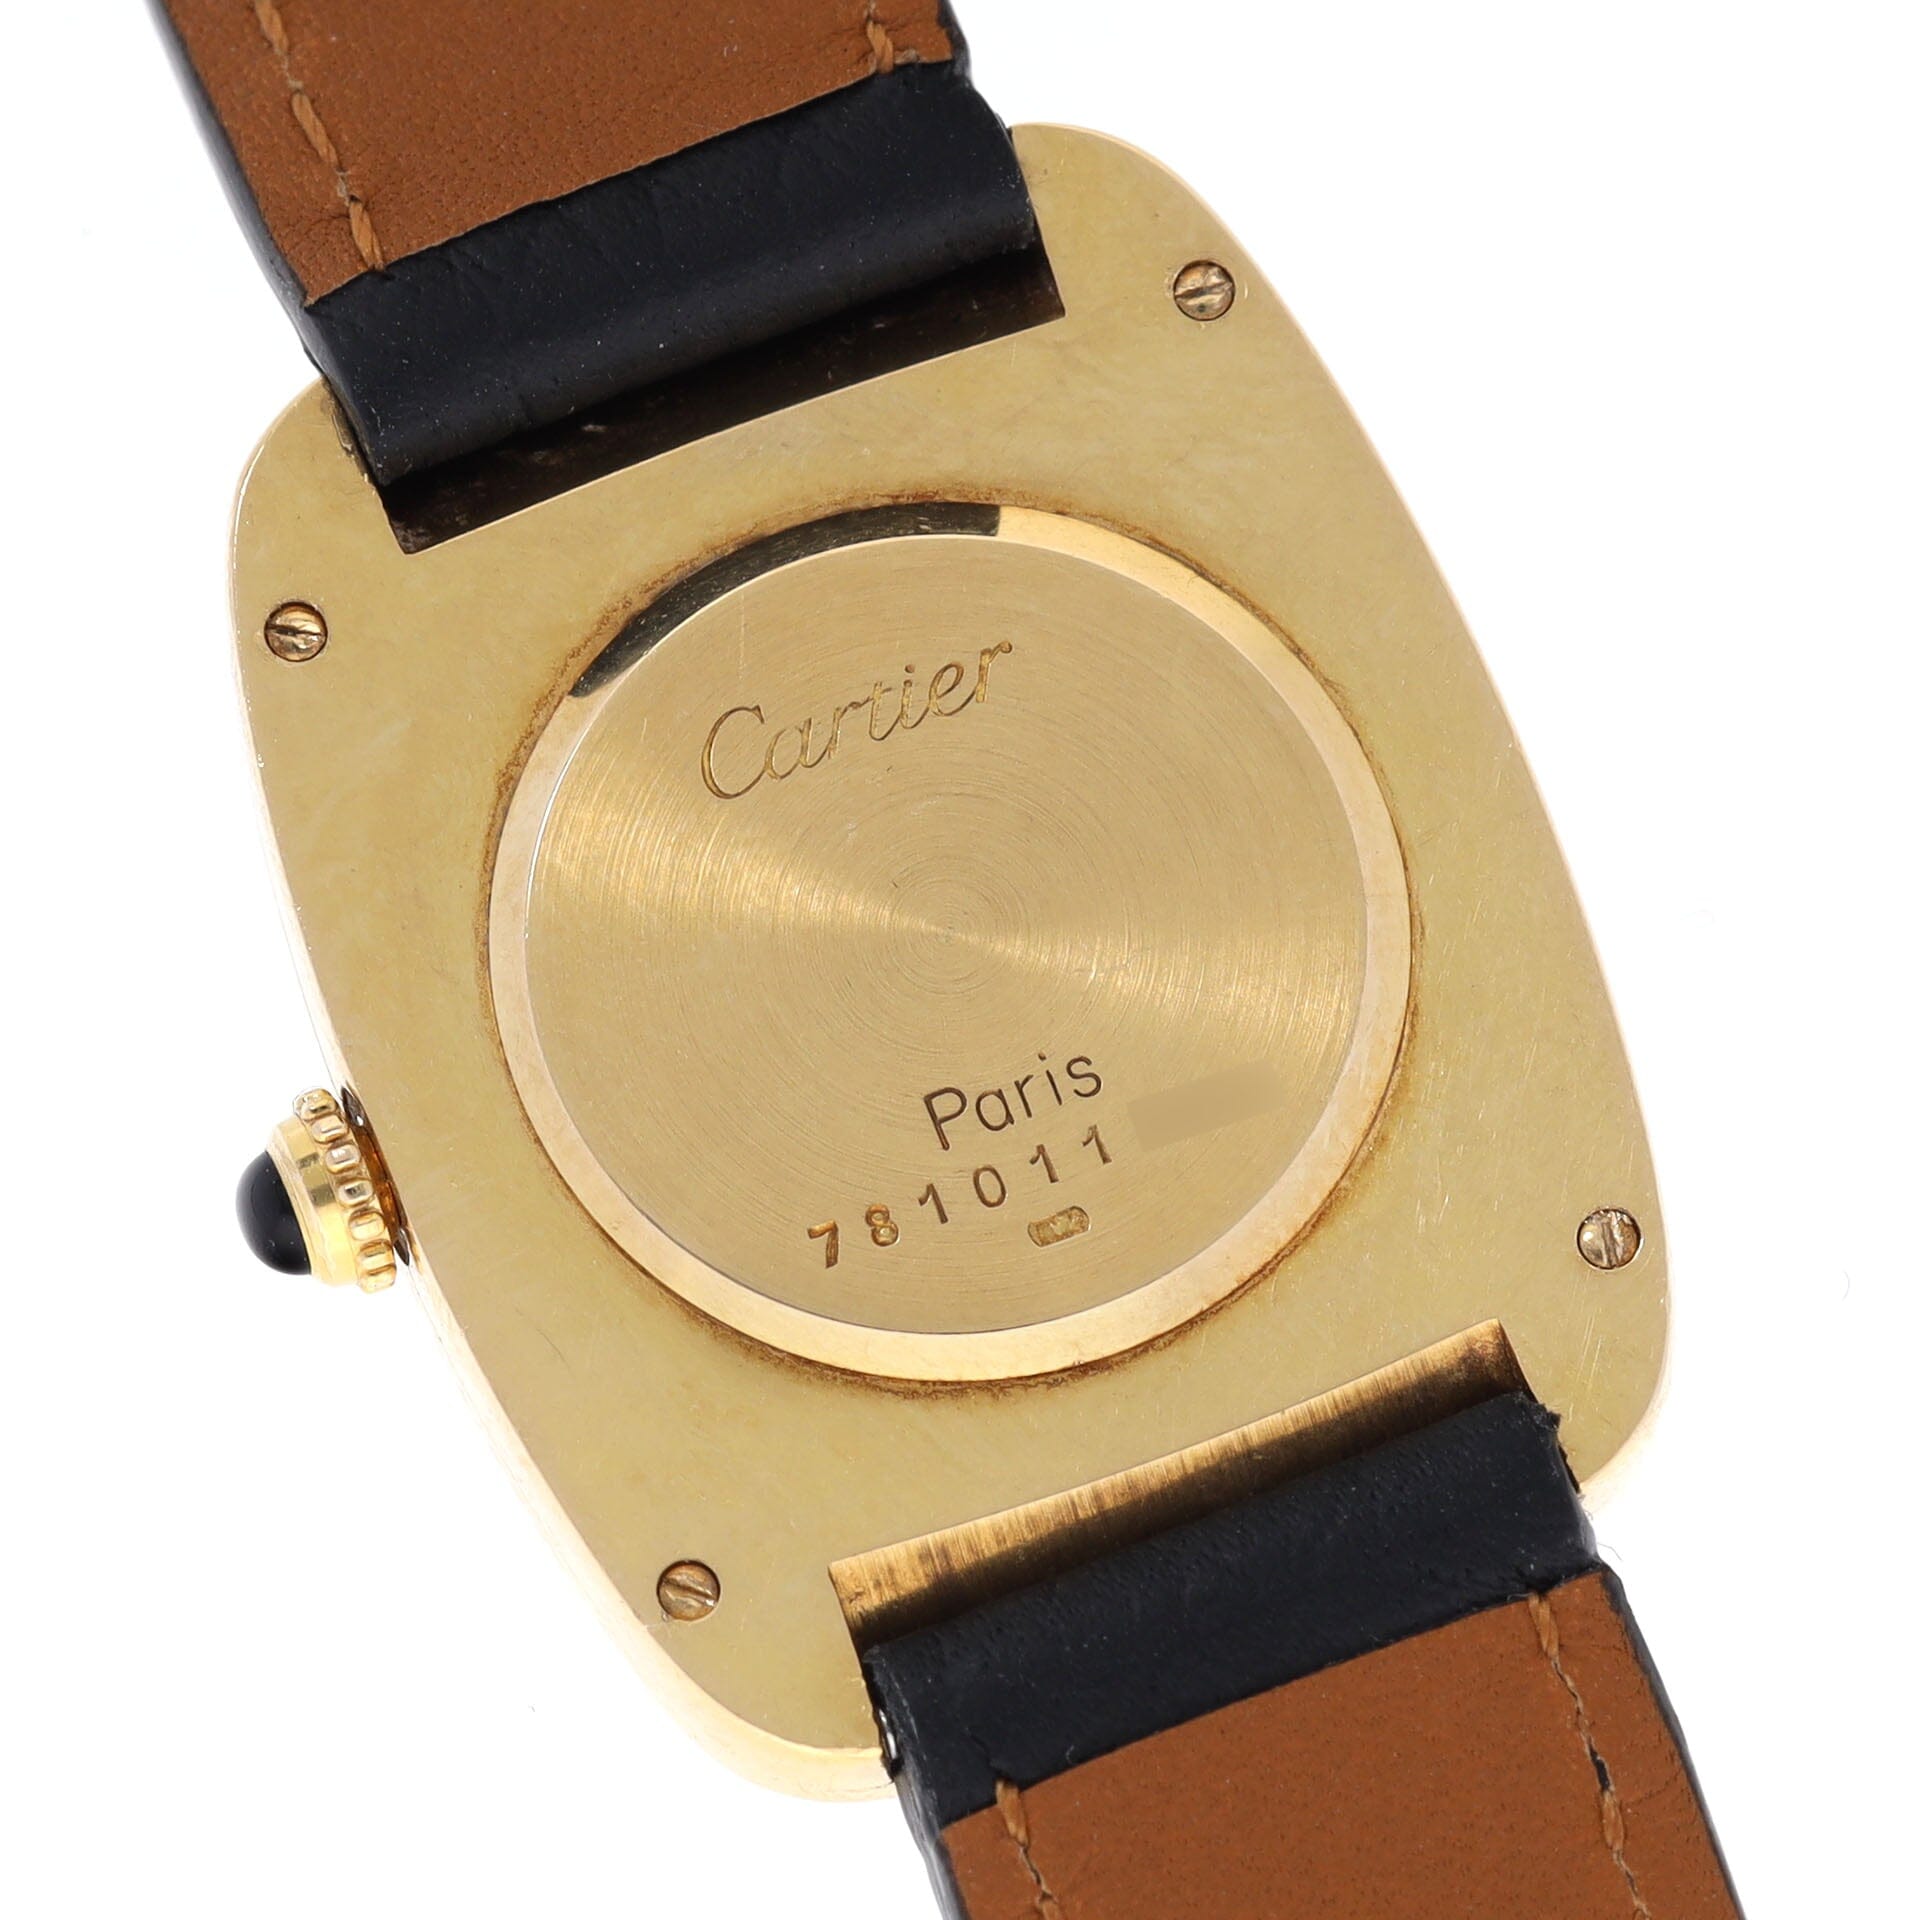 Cartier Faberge 7810 18kt Yellow Gold